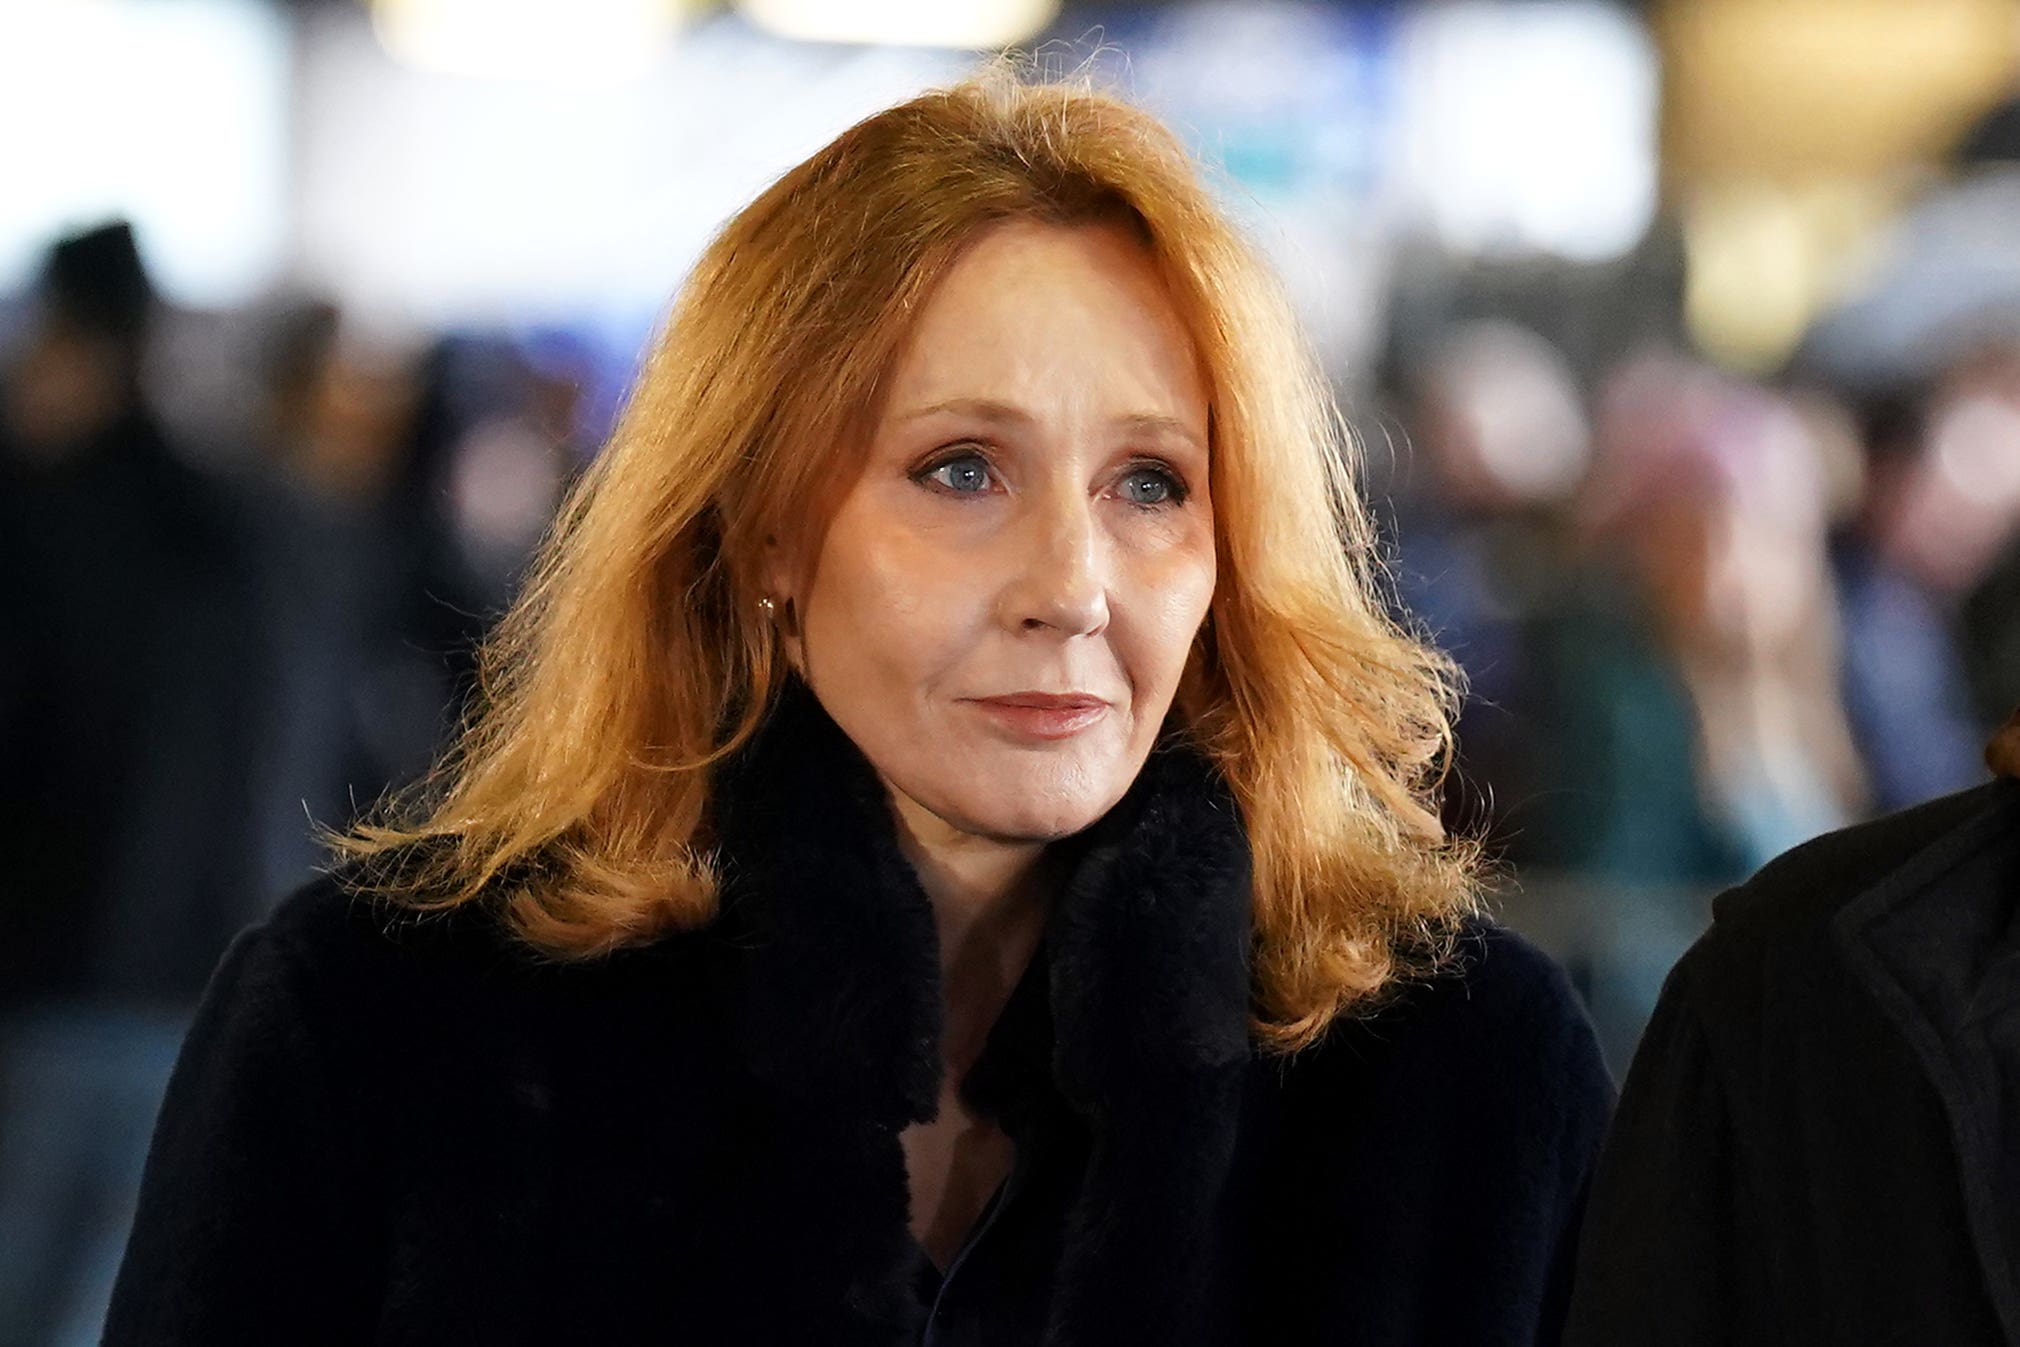 JK Rowling: ‘I want to want to vote Labour’